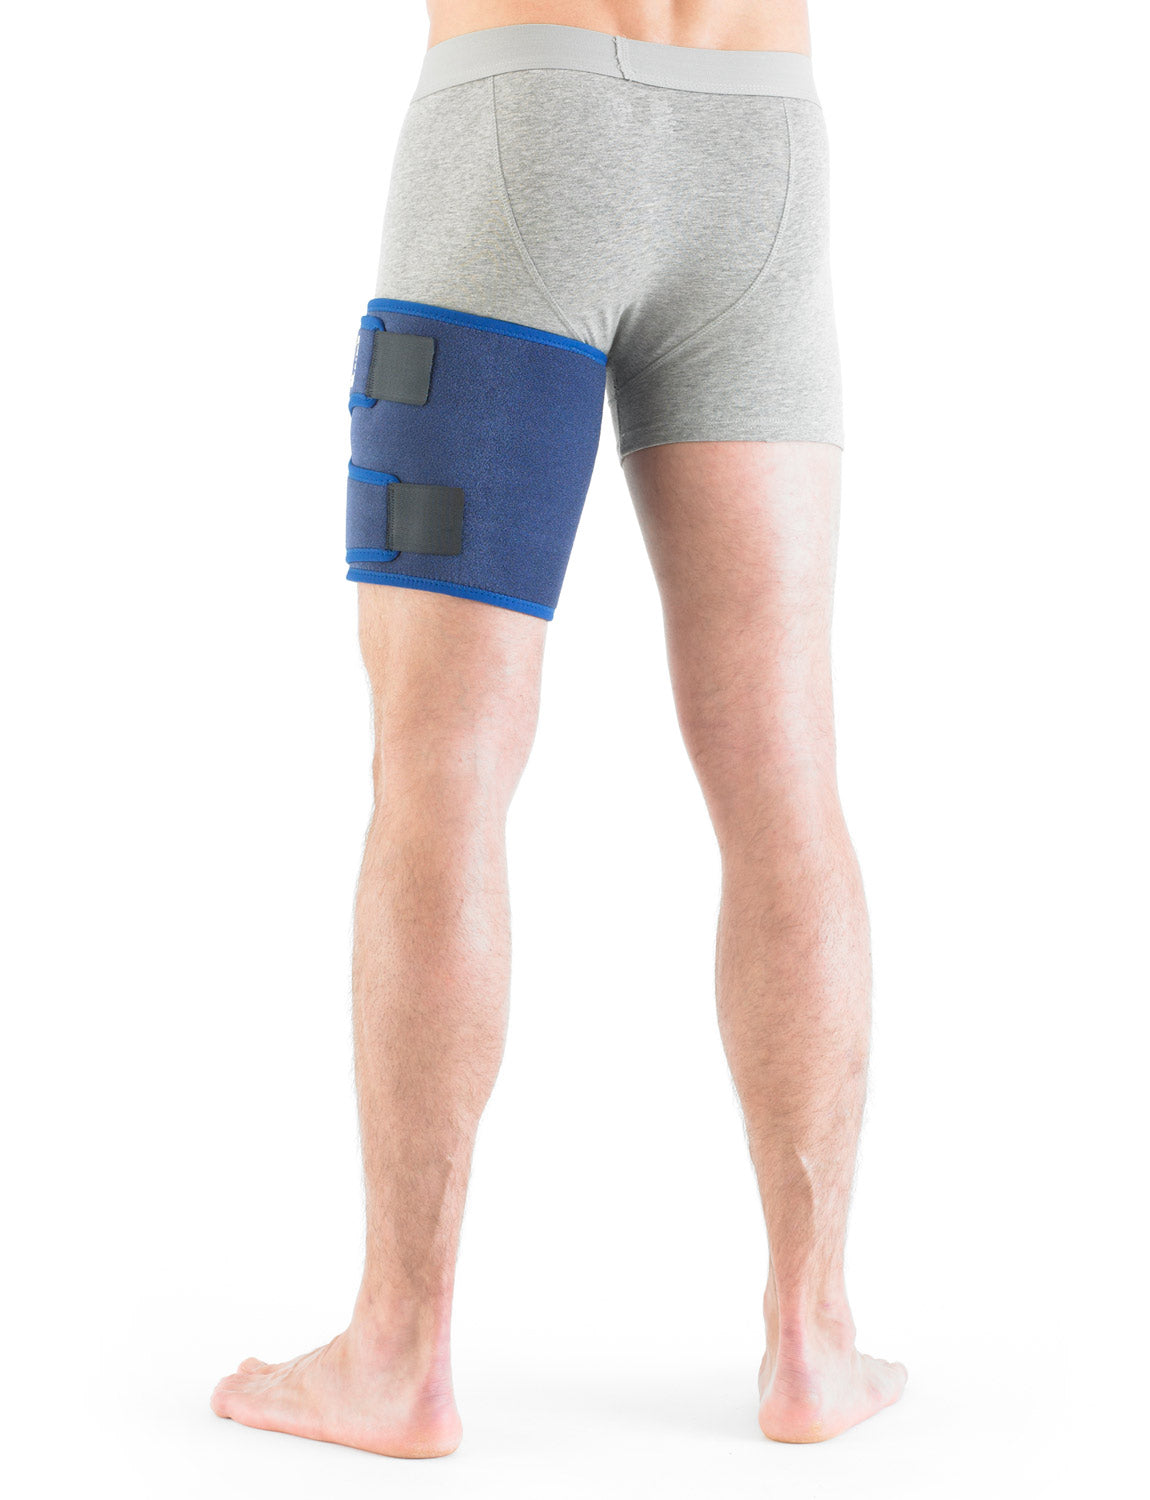 Thigh and Hamstring Support